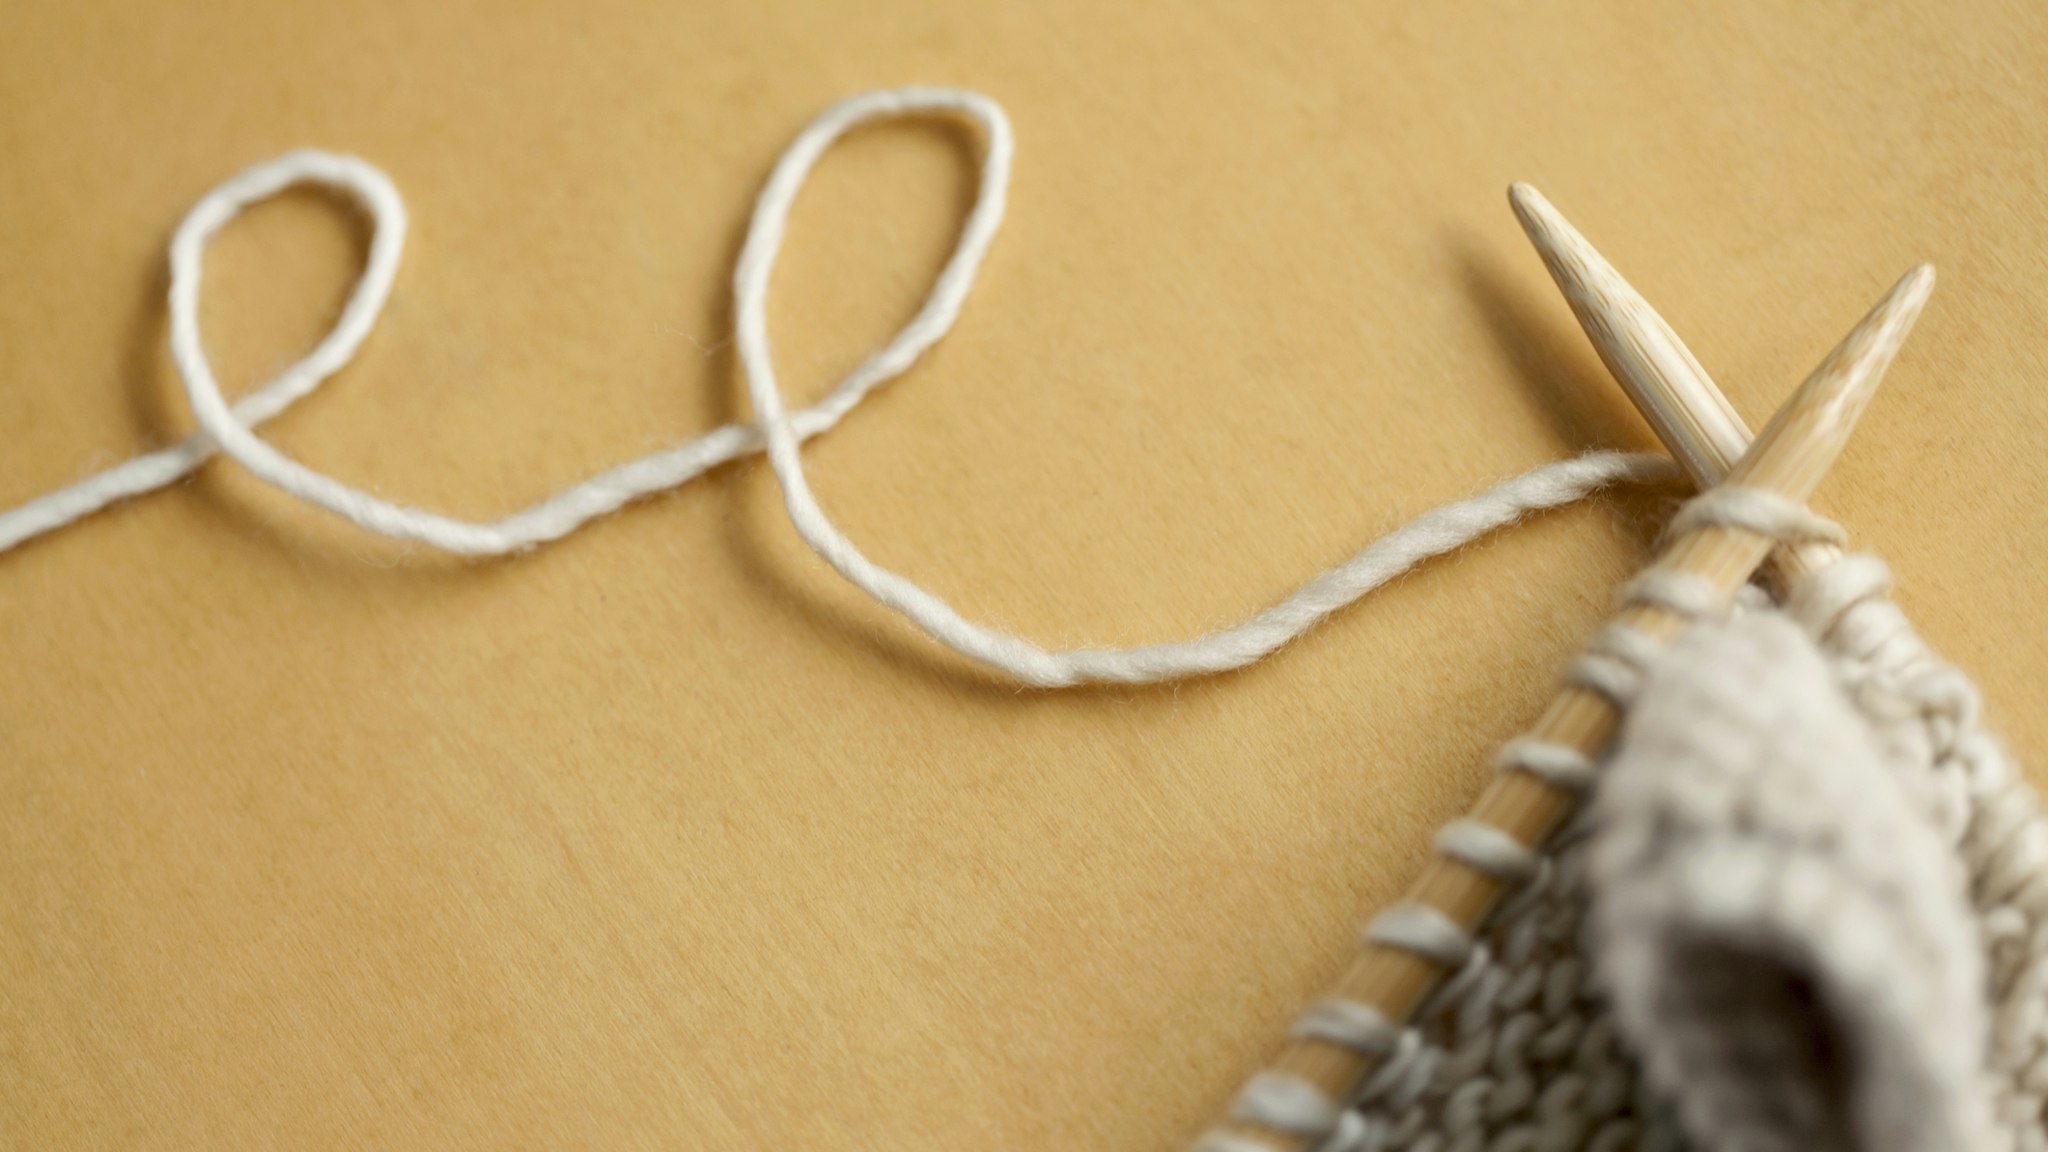 line of wool string connected to knitting project - stock photo